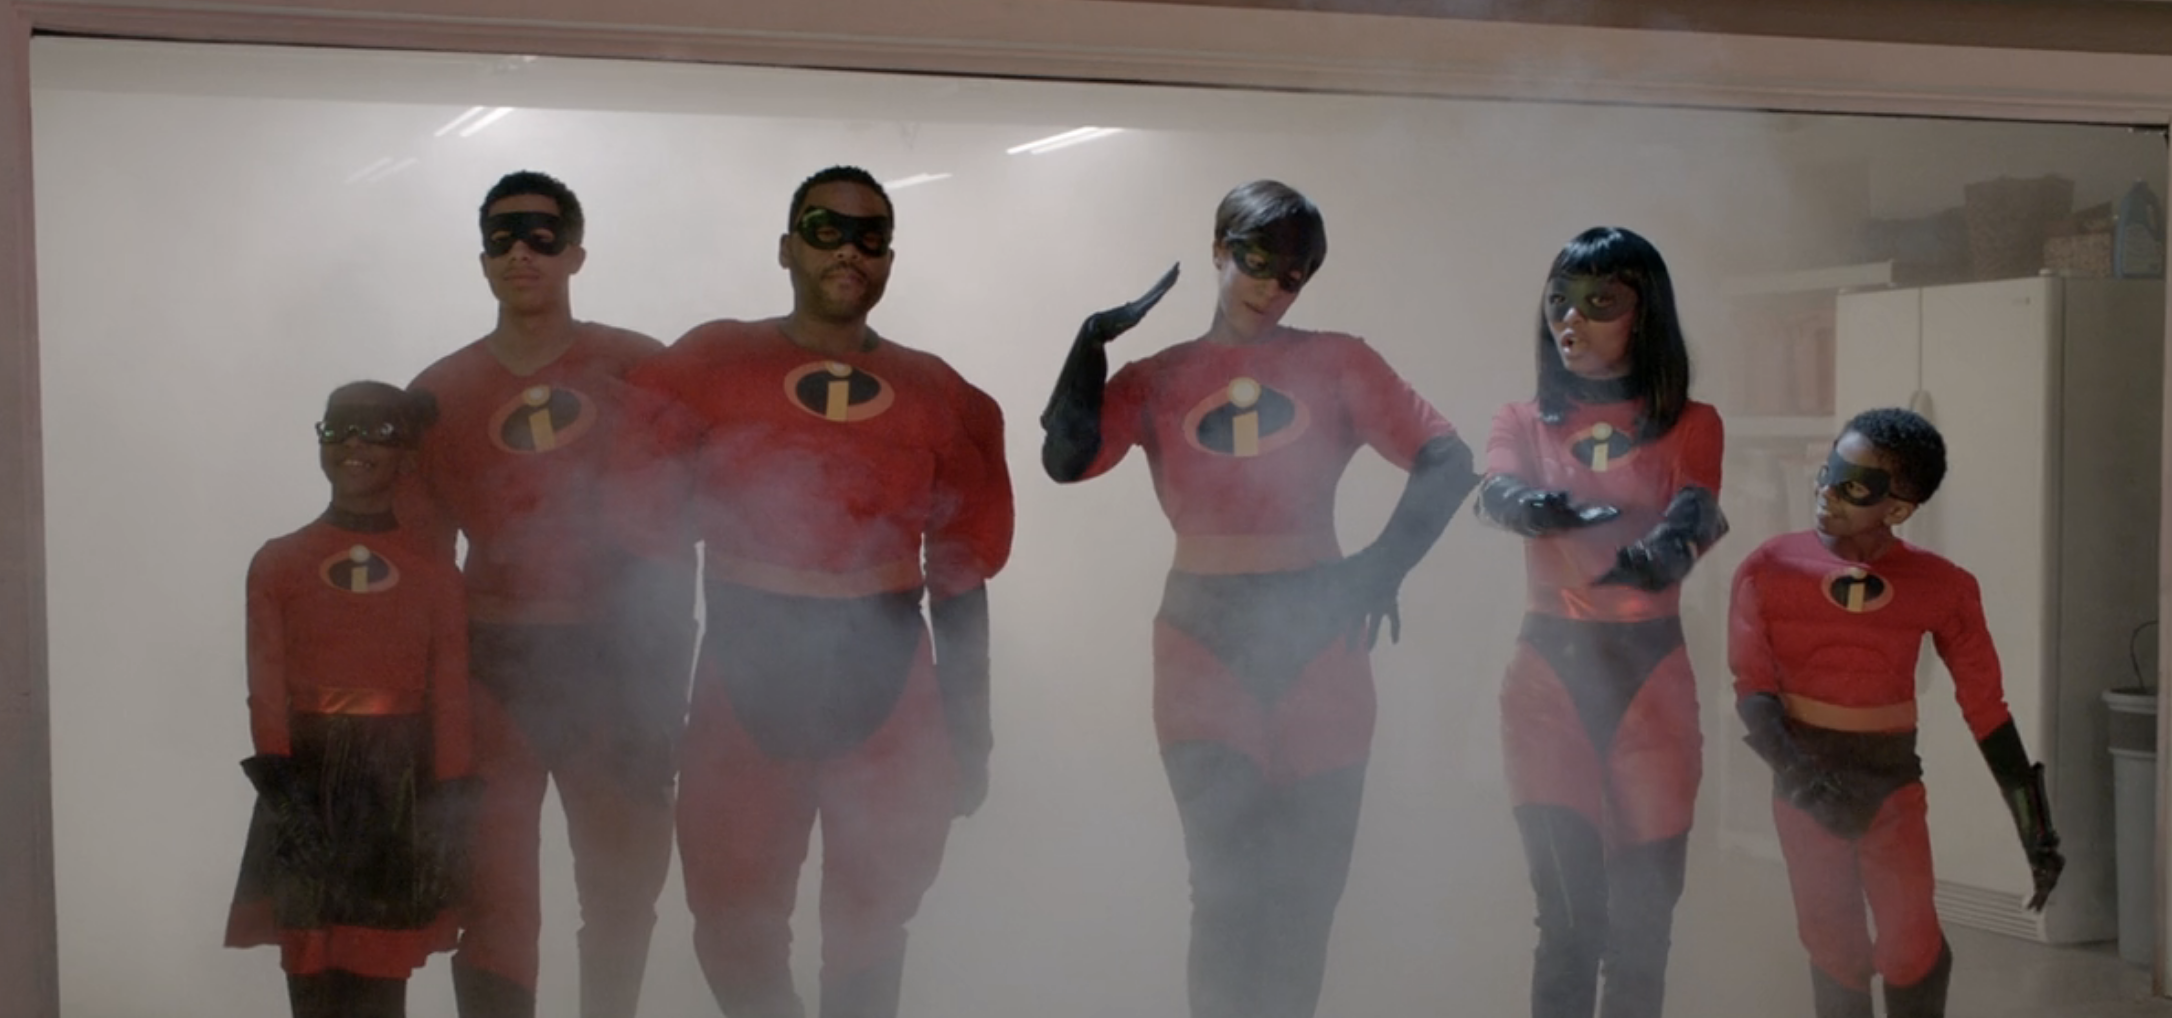 The Johnson family from &quot;Black-ish&quot; struts out a smokey garage wearing The Incredibles superhero costumes